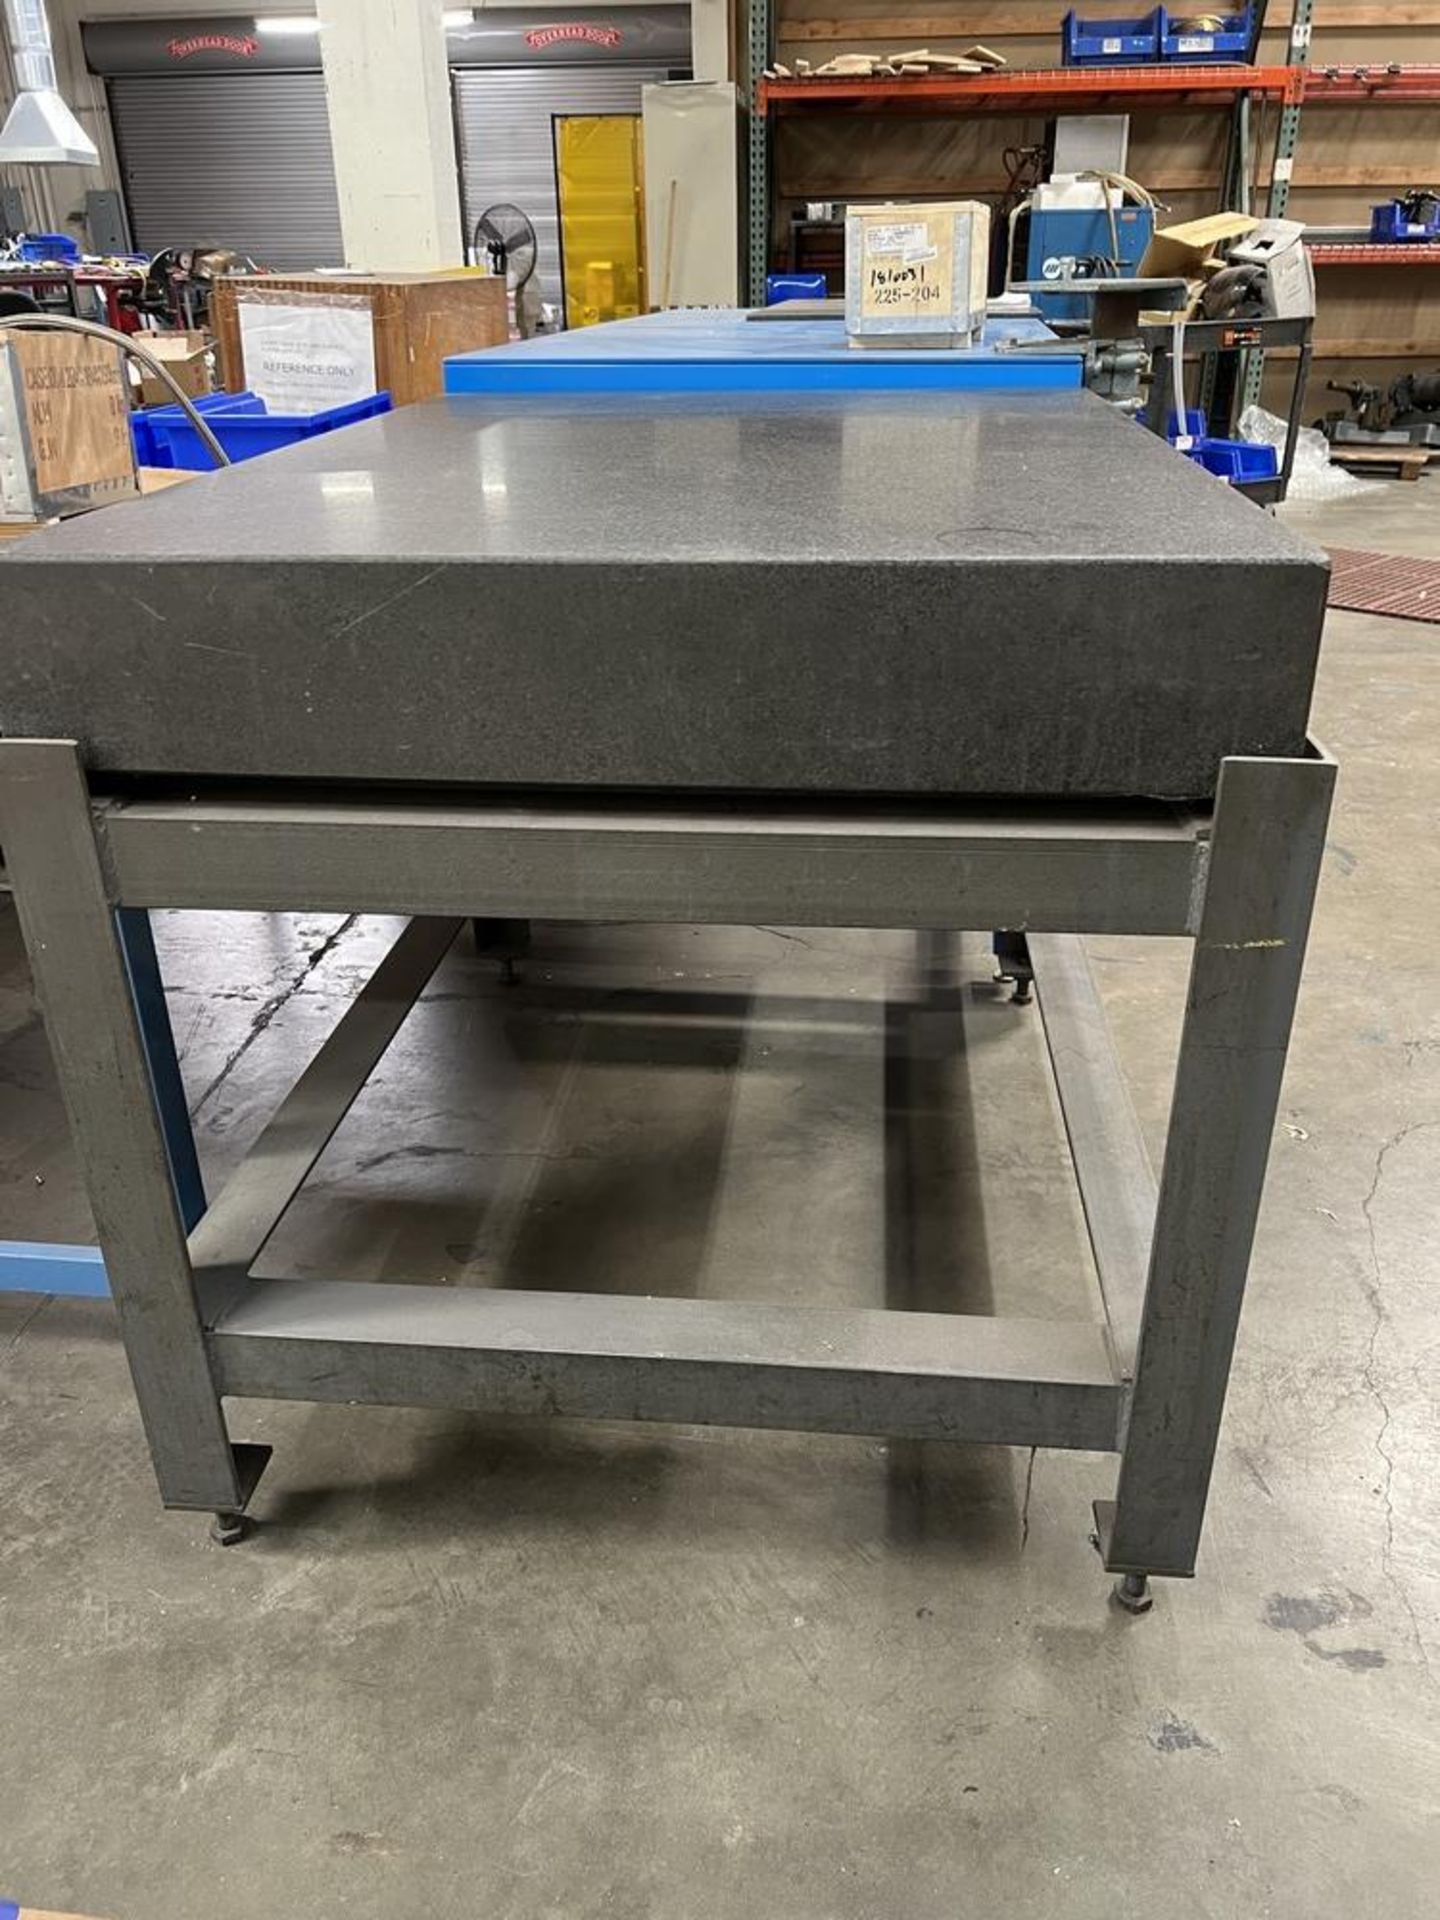 Mojave Black Granite Inspection Table on Heavy Duty Stand 48" x 36" x 6" - Image 5 of 5